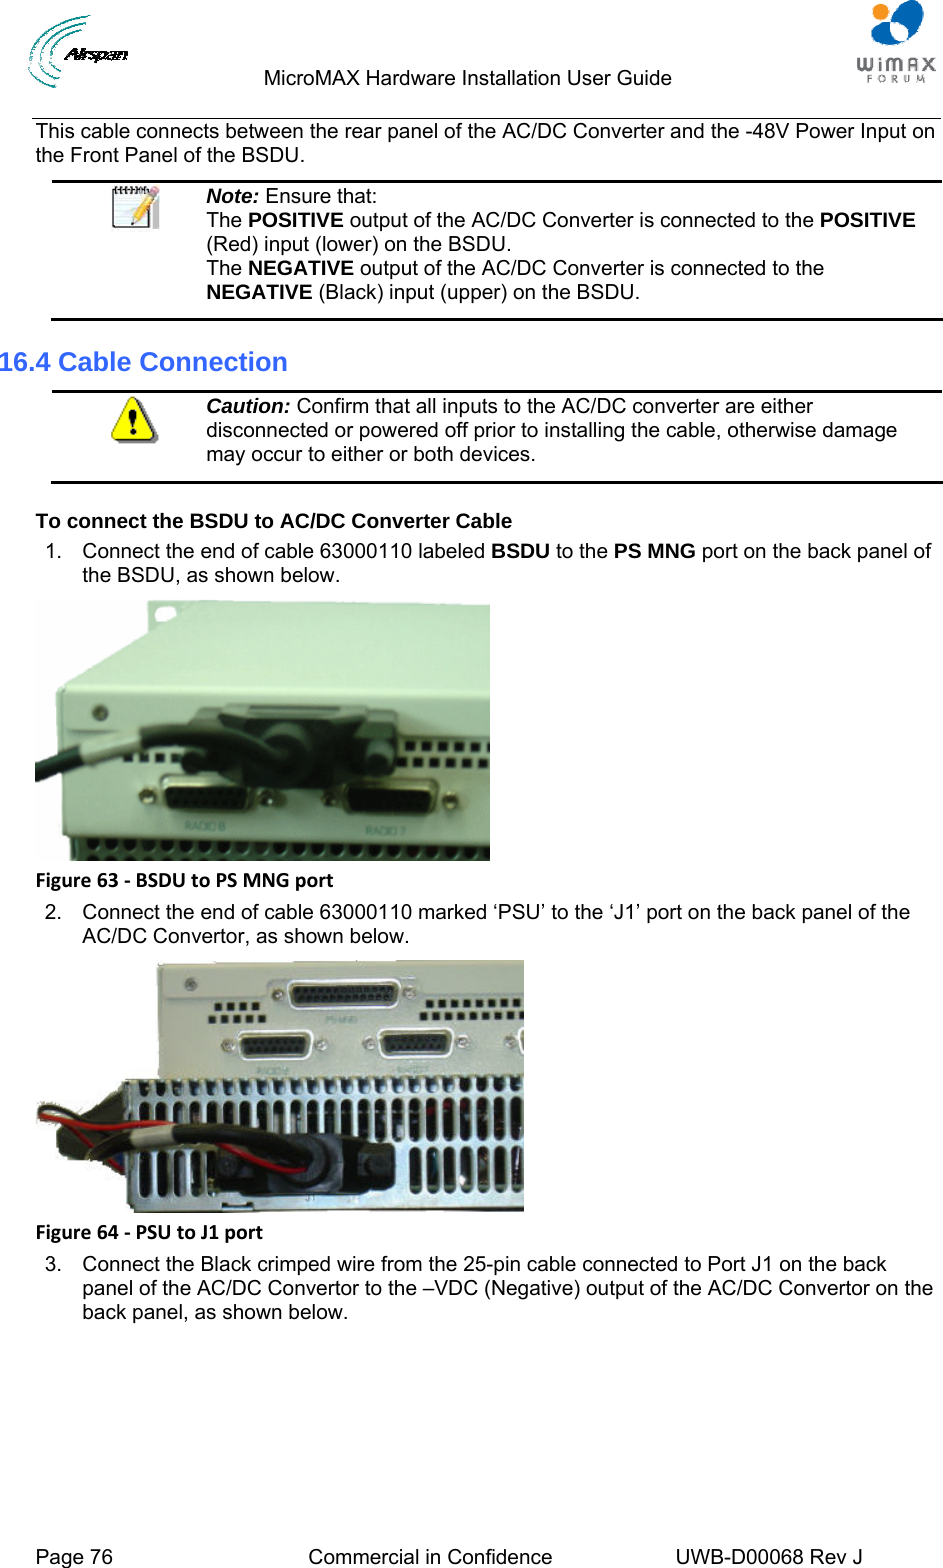                                  MicroMAX Hardware Installation User Guide  Page 76  Commercial in Confidence  UWB-D00068 Rev J   This cable connects between the rear panel of the AC/DC Converter and the -48V Power Input on the Front Panel of the BSDU.  Note: Ensure that:  The POSITIVE output of the AC/DC Converter is connected to the POSITIVE (Red) input (lower) on the BSDU. The NEGATIVE output of the AC/DC Converter is connected to the NEGATIVE (Black) input (upper) on the BSDU. 16.4 Cable Connection  Caution: Confirm that all inputs to the AC/DC converter are either disconnected or powered off prior to installing the cable, otherwise damage may occur to either or both devices.  To connect the BSDU to AC/DC Converter Cable 1.  Connect the end of cable 63000110 labeled BSDU to the PS MNG port on the back panel of the BSDU, as shown below.  Figure63‐BSDUtoPSMNGport2.  Connect the end of cable 63000110 marked ‘PSU’ to the ‘J1’ port on the back panel of the AC/DC Convertor, as shown below.  Figure64‐PSUtoJ1port3.  Connect the Black crimped wire from the 25-pin cable connected to Port J1 on the back panel of the AC/DC Convertor to the –VDC (Negative) output of the AC/DC Convertor on the back panel, as shown below. 